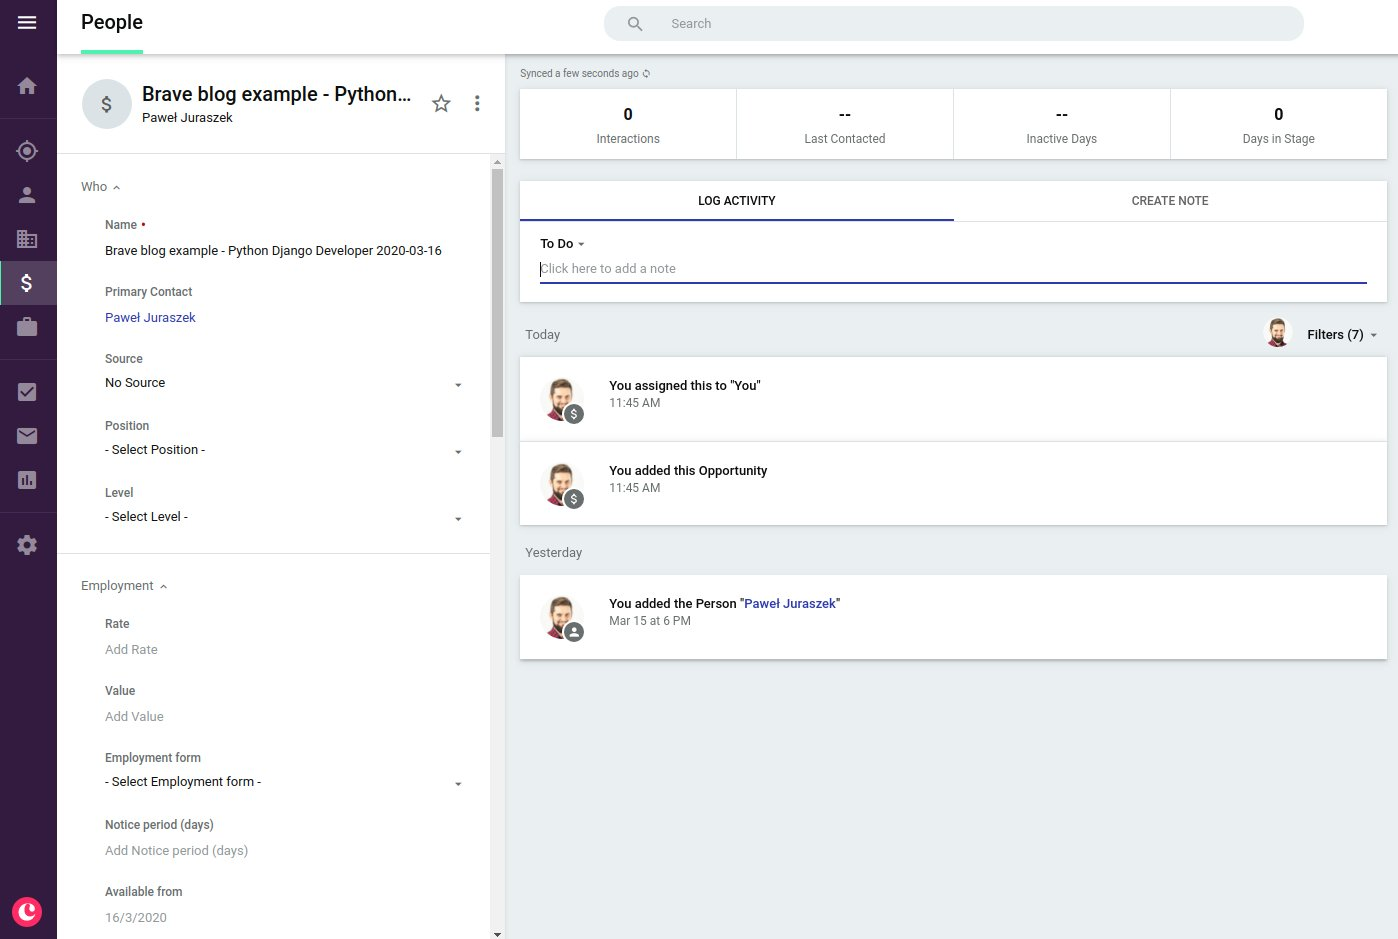 Recruitment system - integrating Gmail, Bravely, Jira, Slack, and Copper CRM